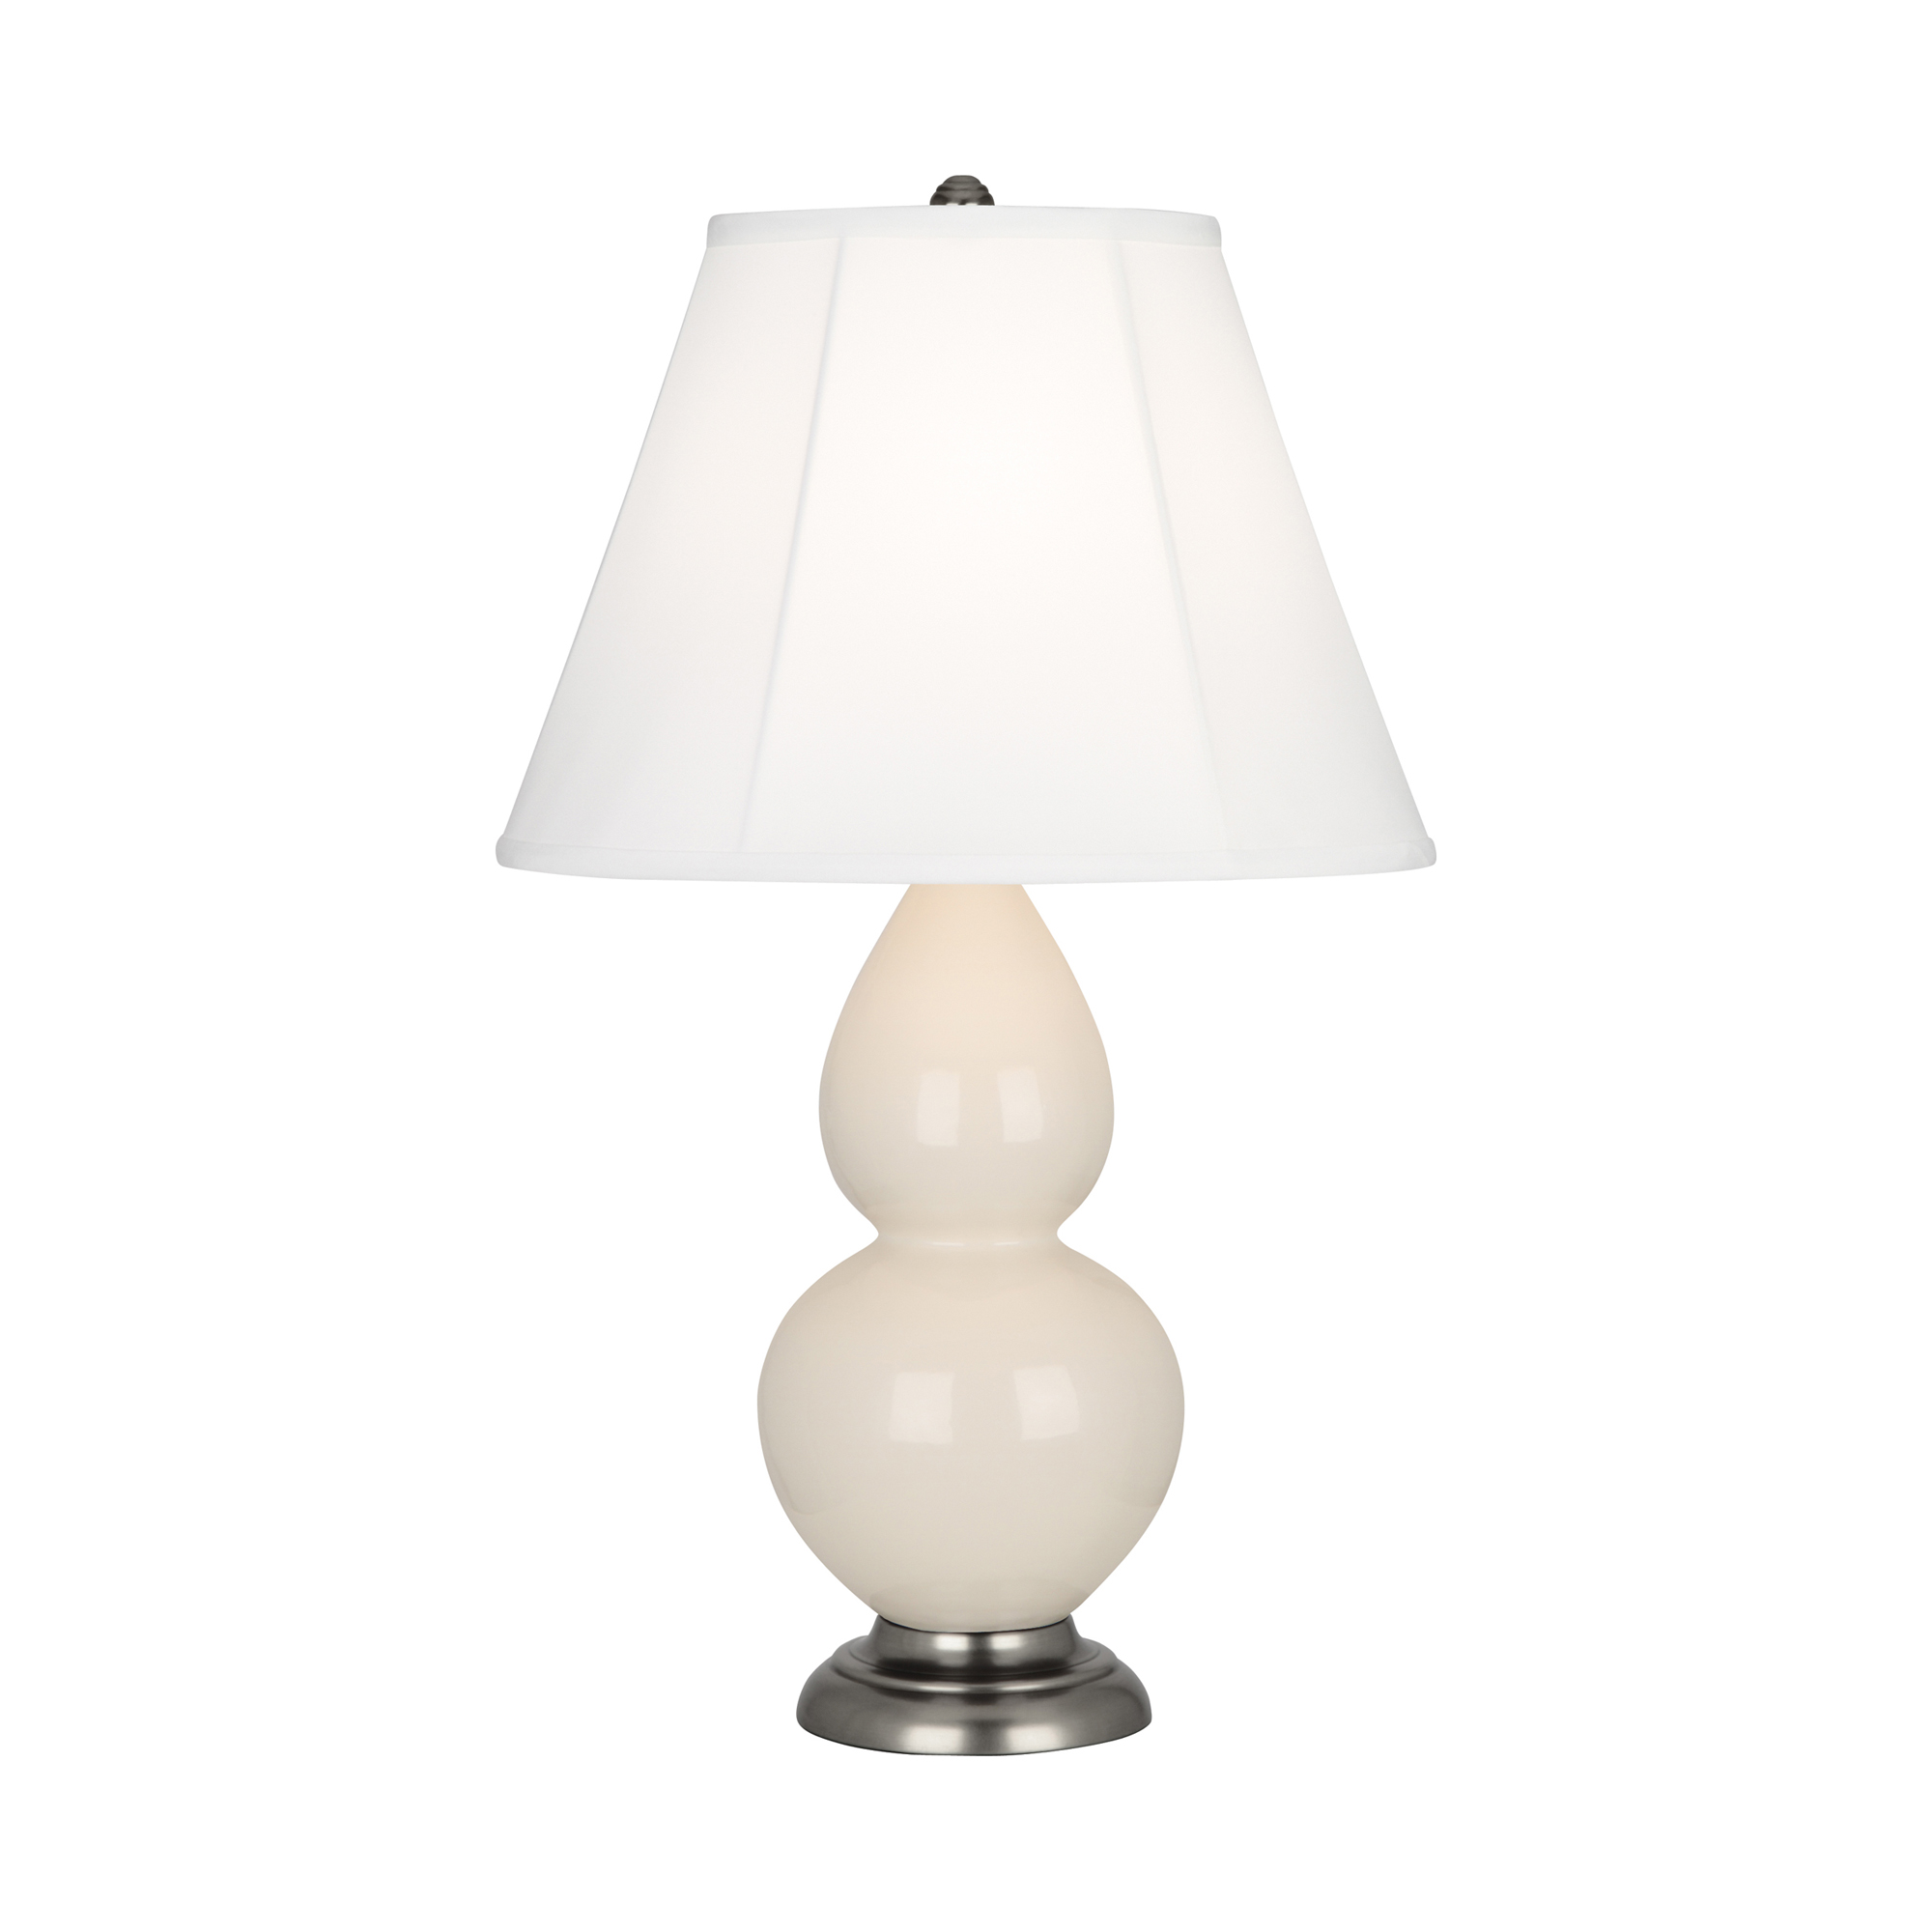 Small Double Gourd Accent Lamp Style #1776